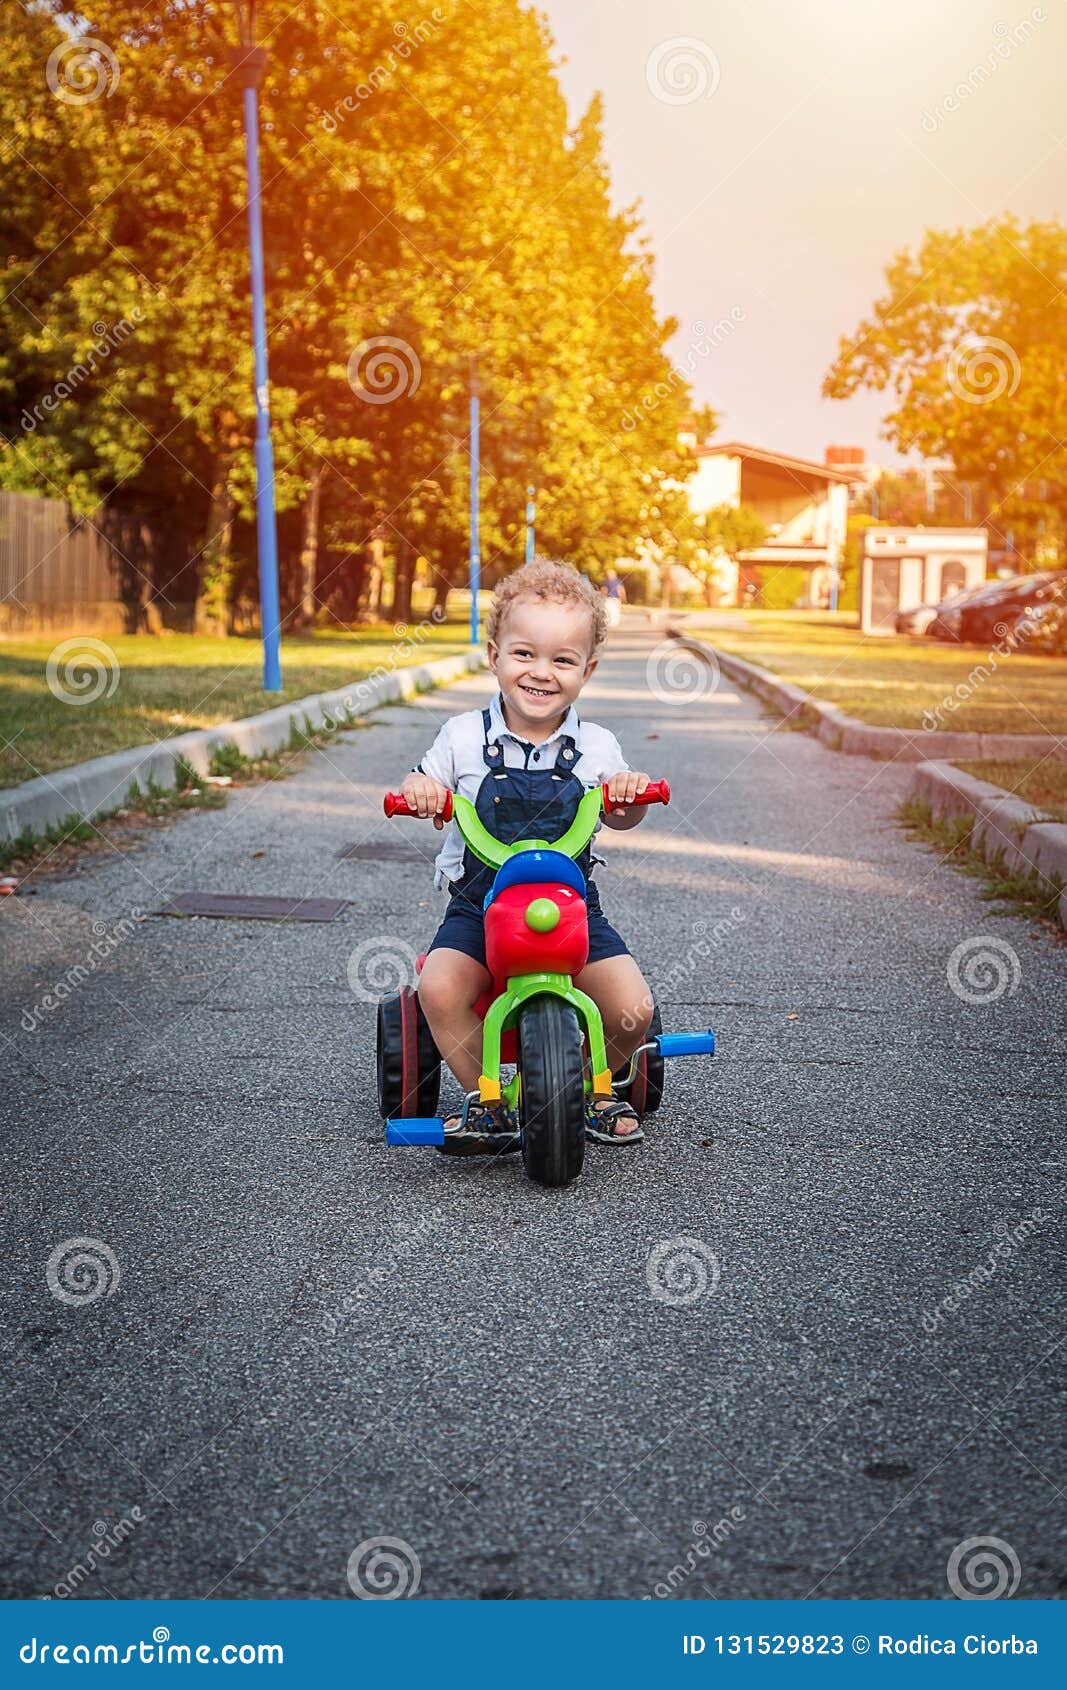 Download Smiling Children Baby Boy Riding Bicycle Outdoor Stock Image - Image of bicycle, little: 131529823